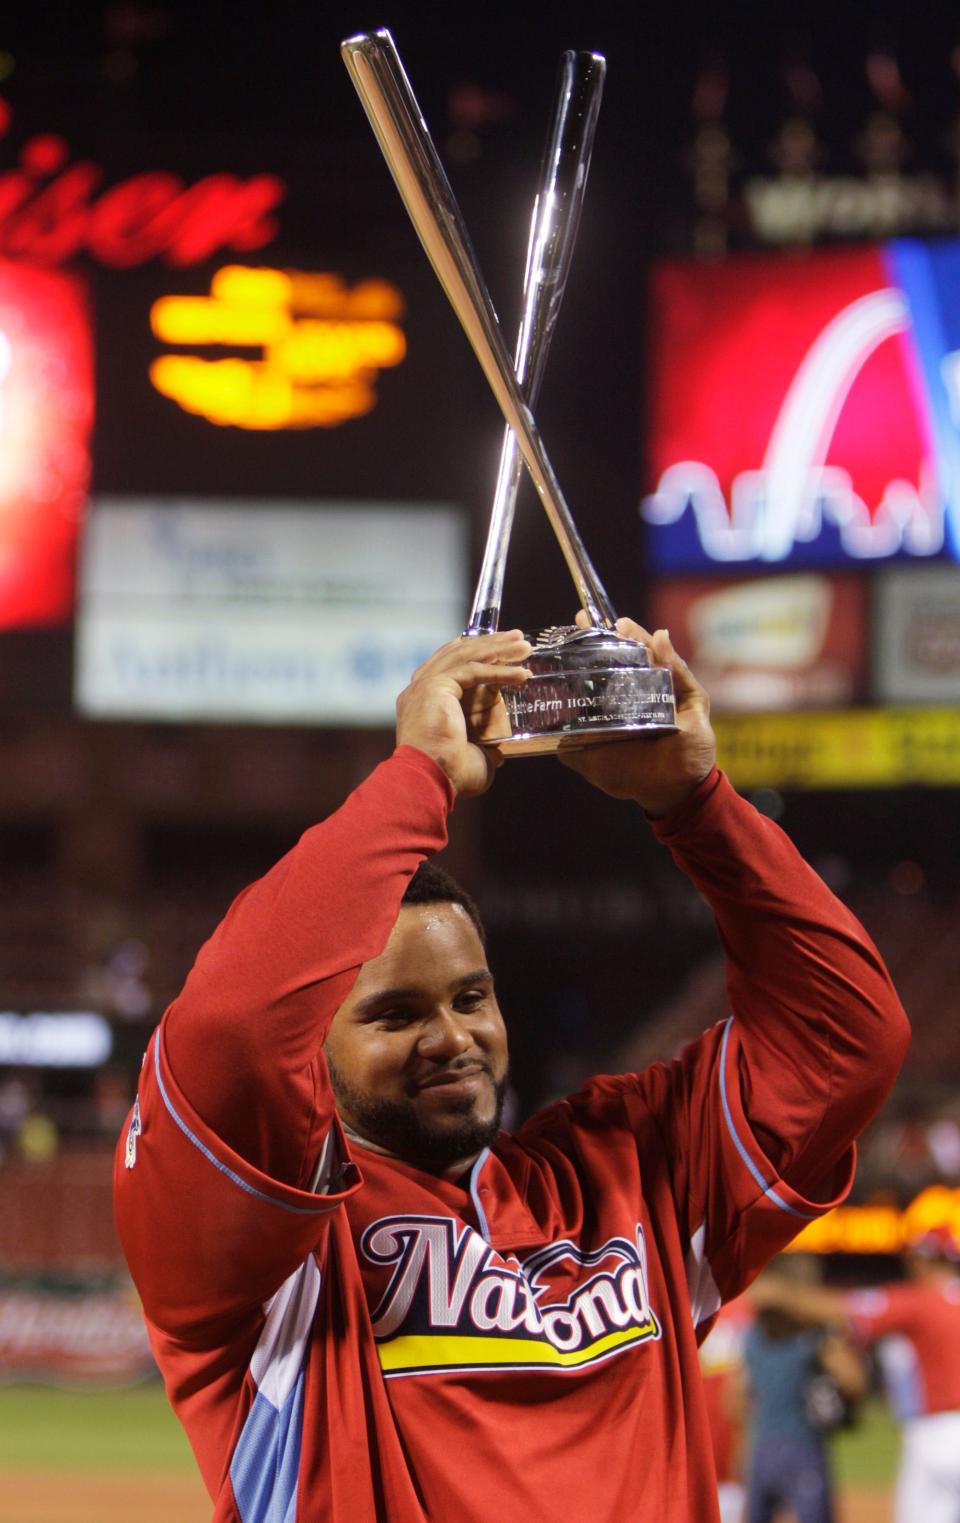 National League's Prince Fielder of the Milwaukee Brewers holds his trophy after winning the MLB Home Run Derby in St. Louis on July 13, 2009.